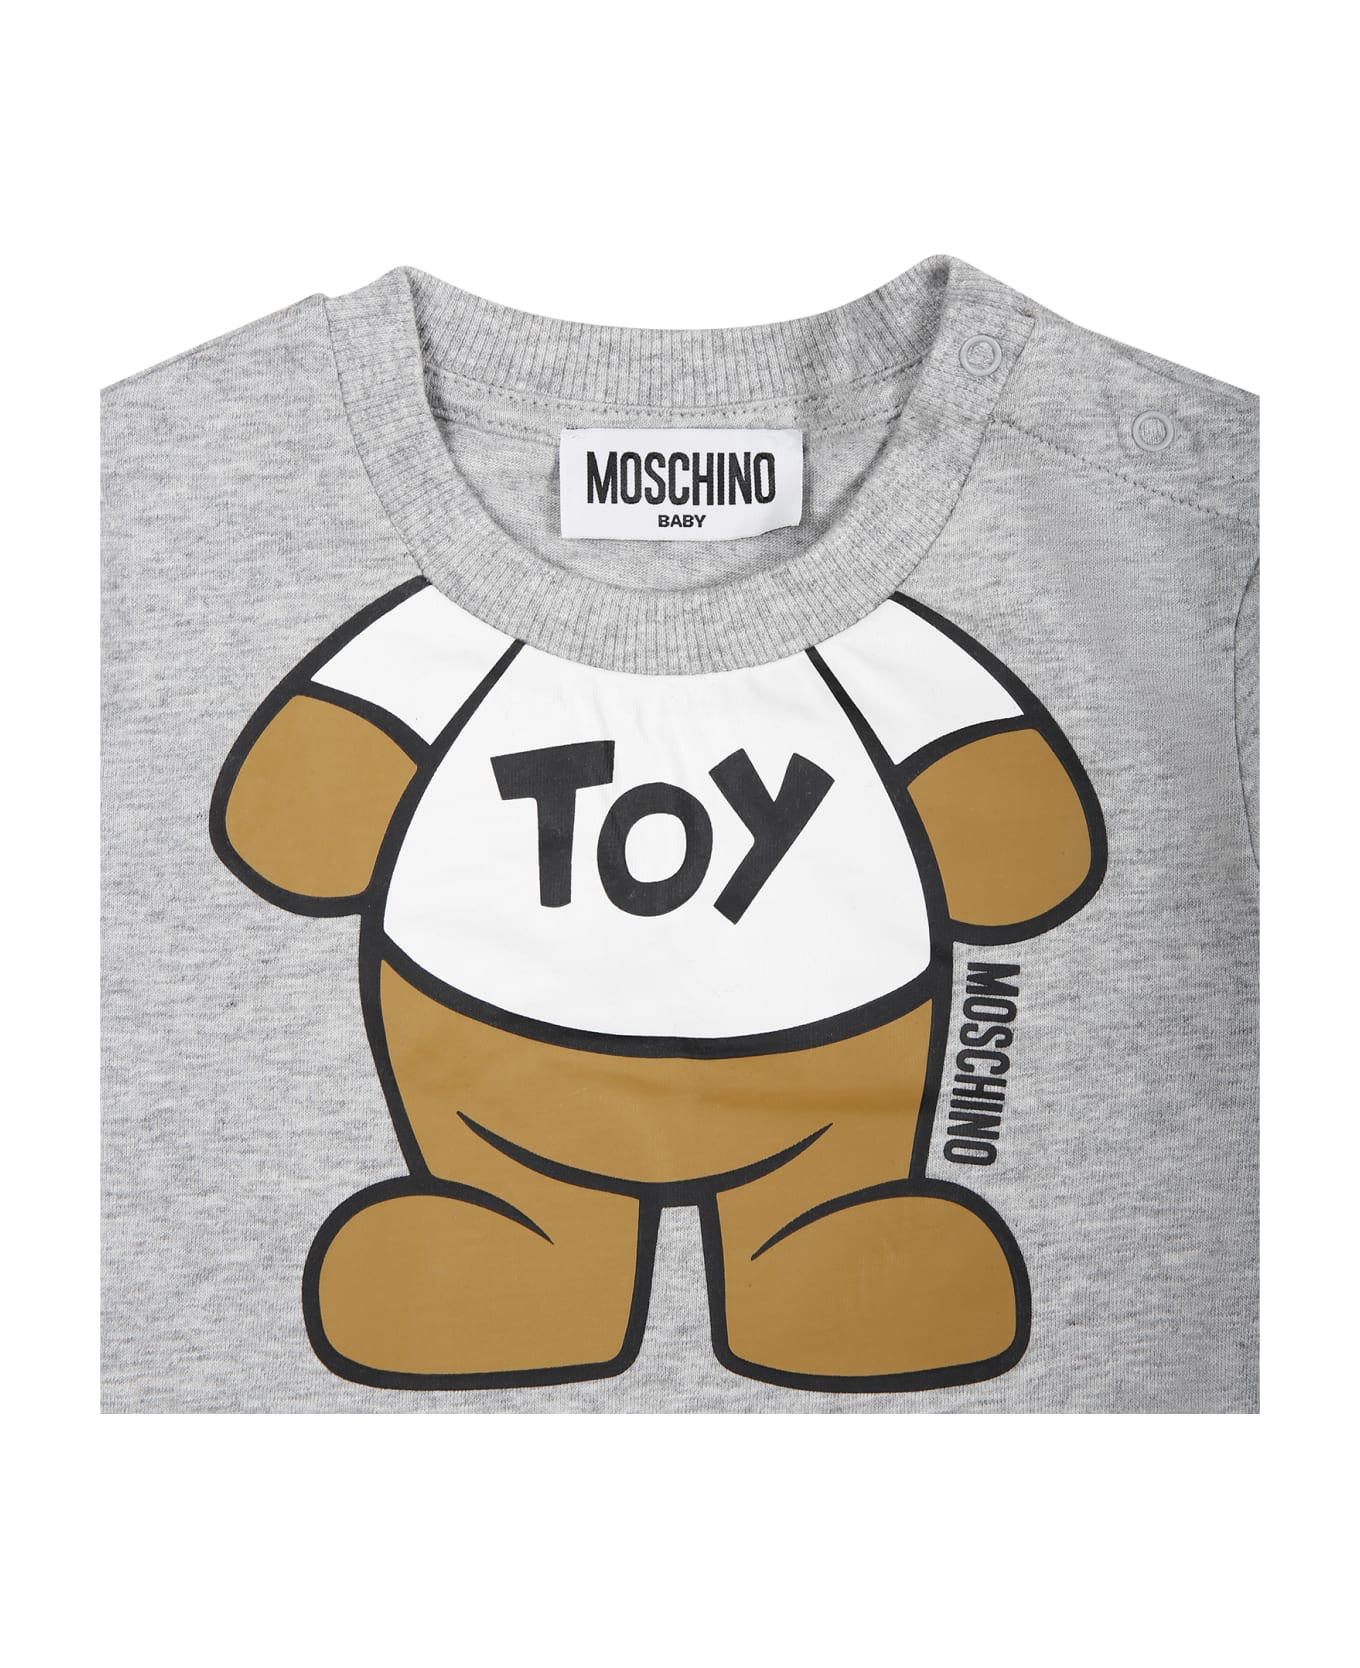 Moschino Gray T-shirt For Babies With Teddy Bear - Grey